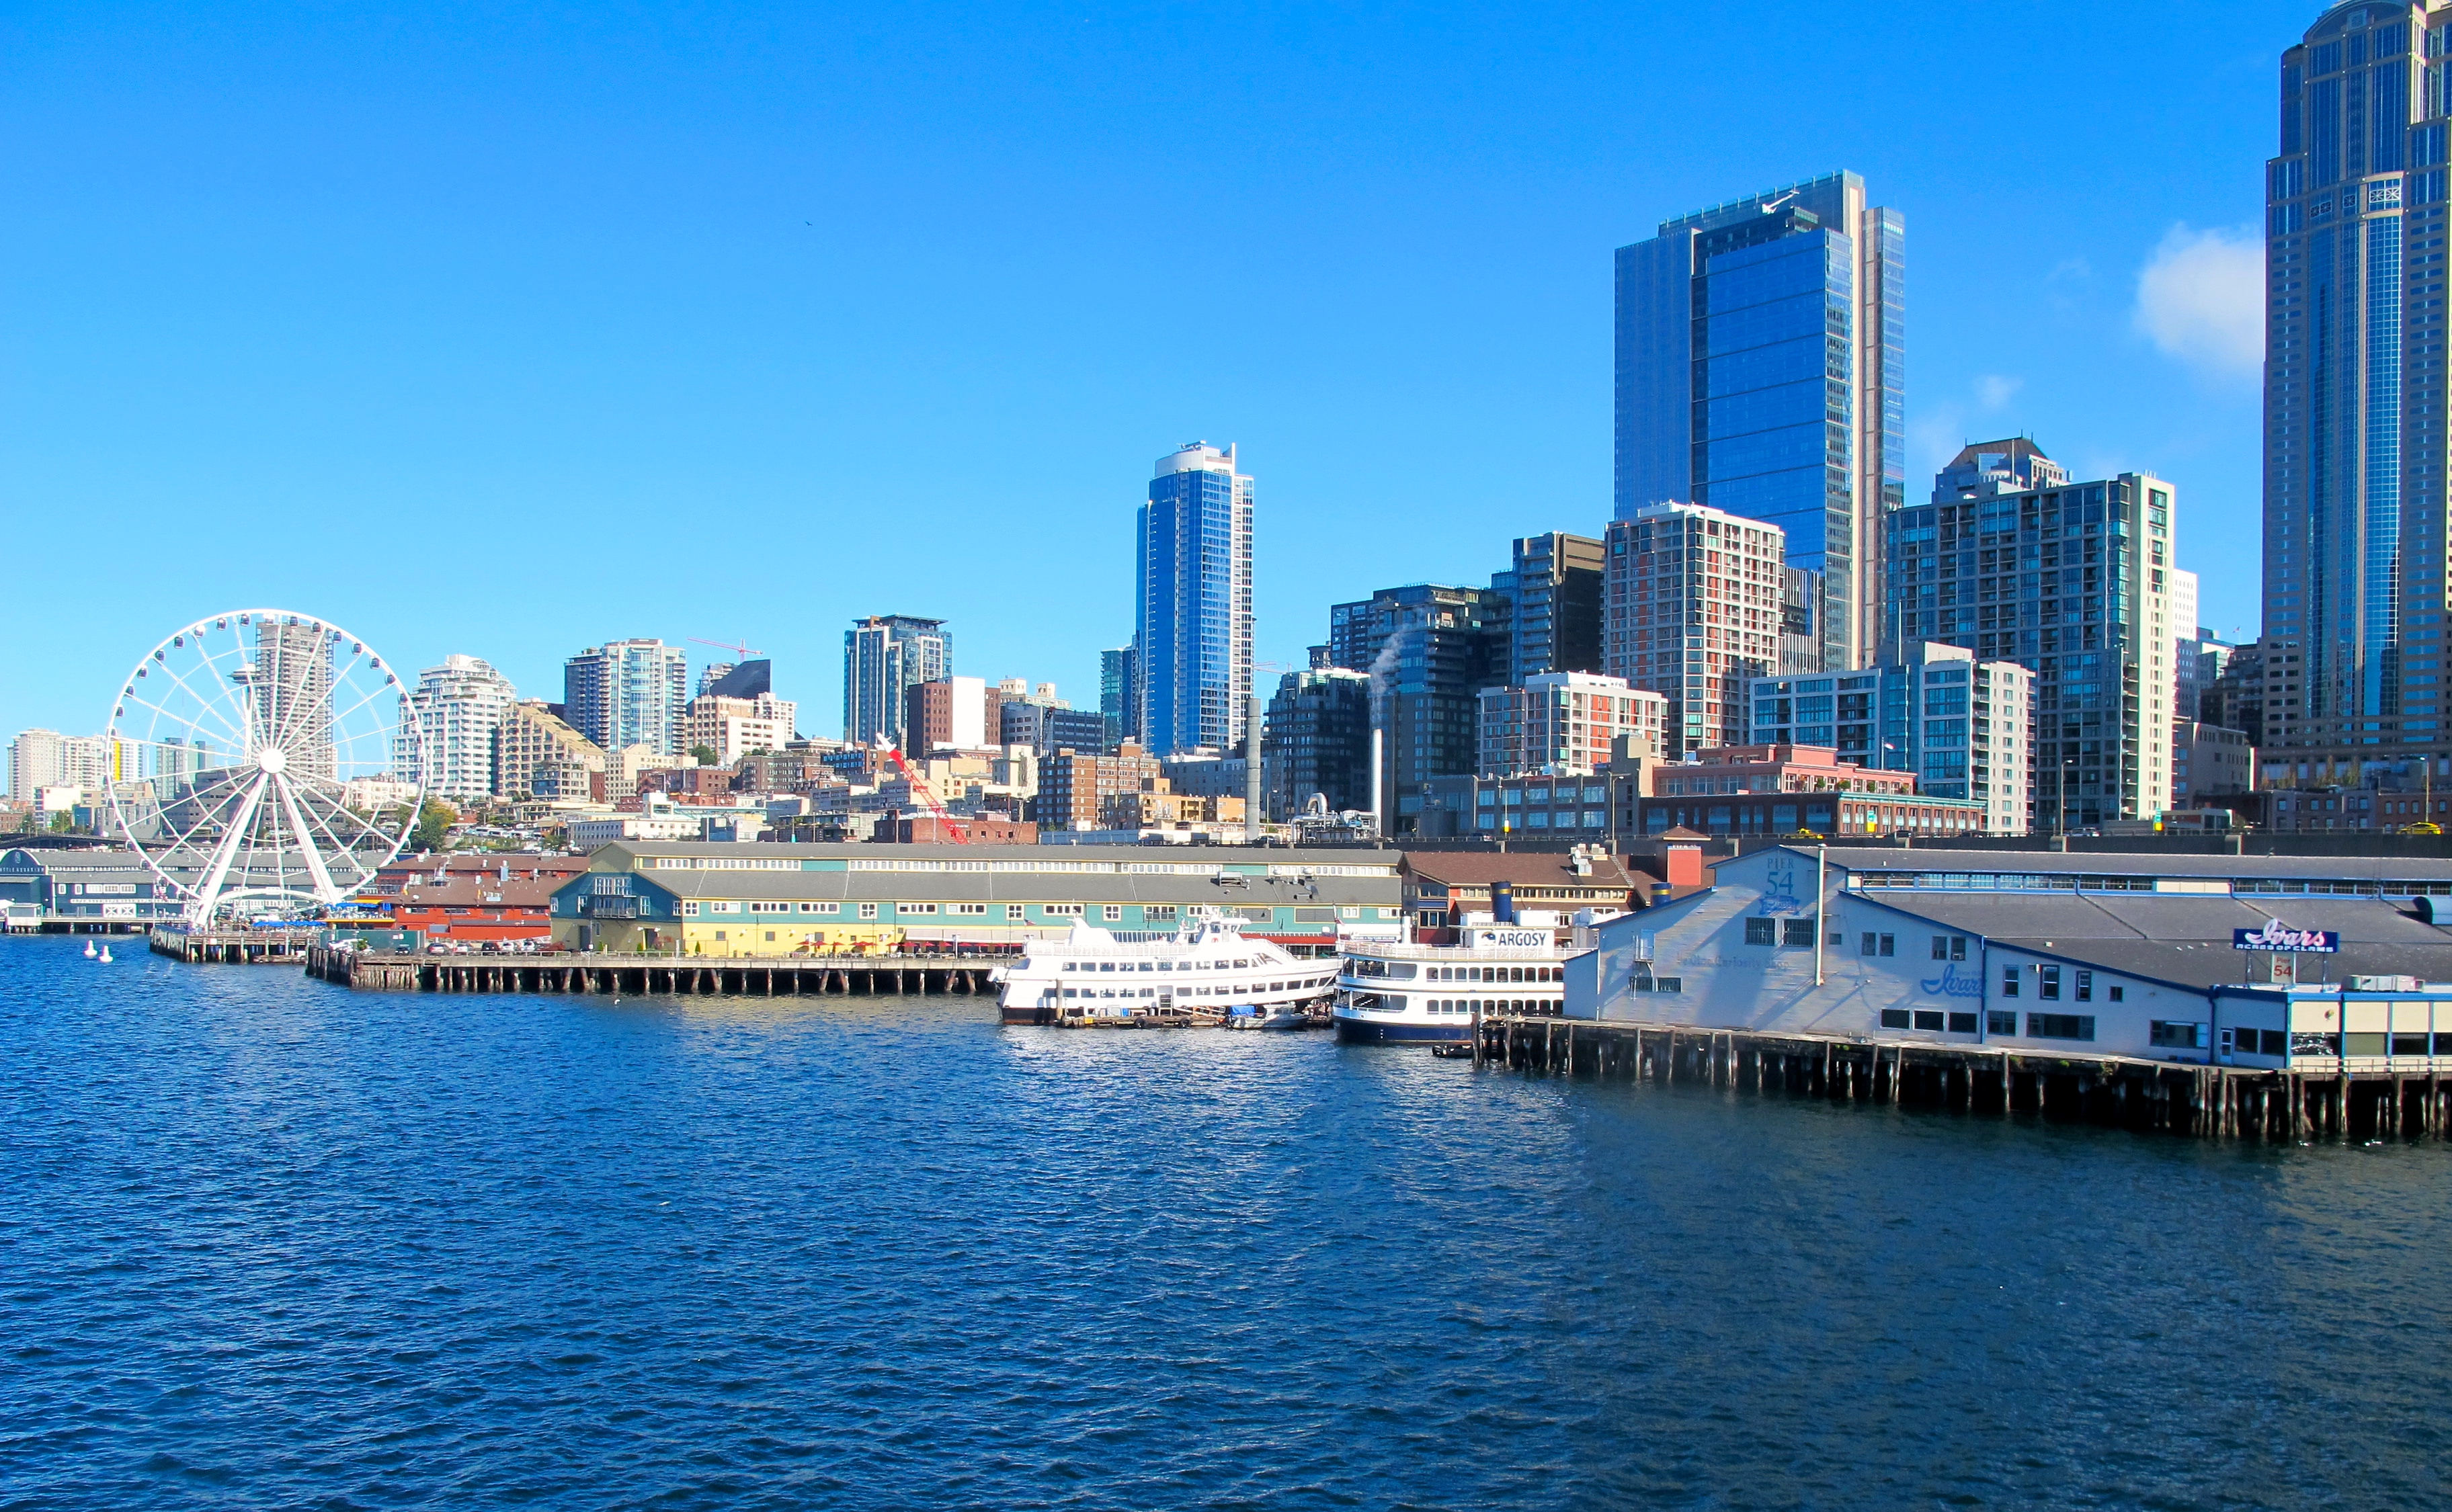 Downtown Seattle and piers on an especially sunny day! Photo by Marla Norman.